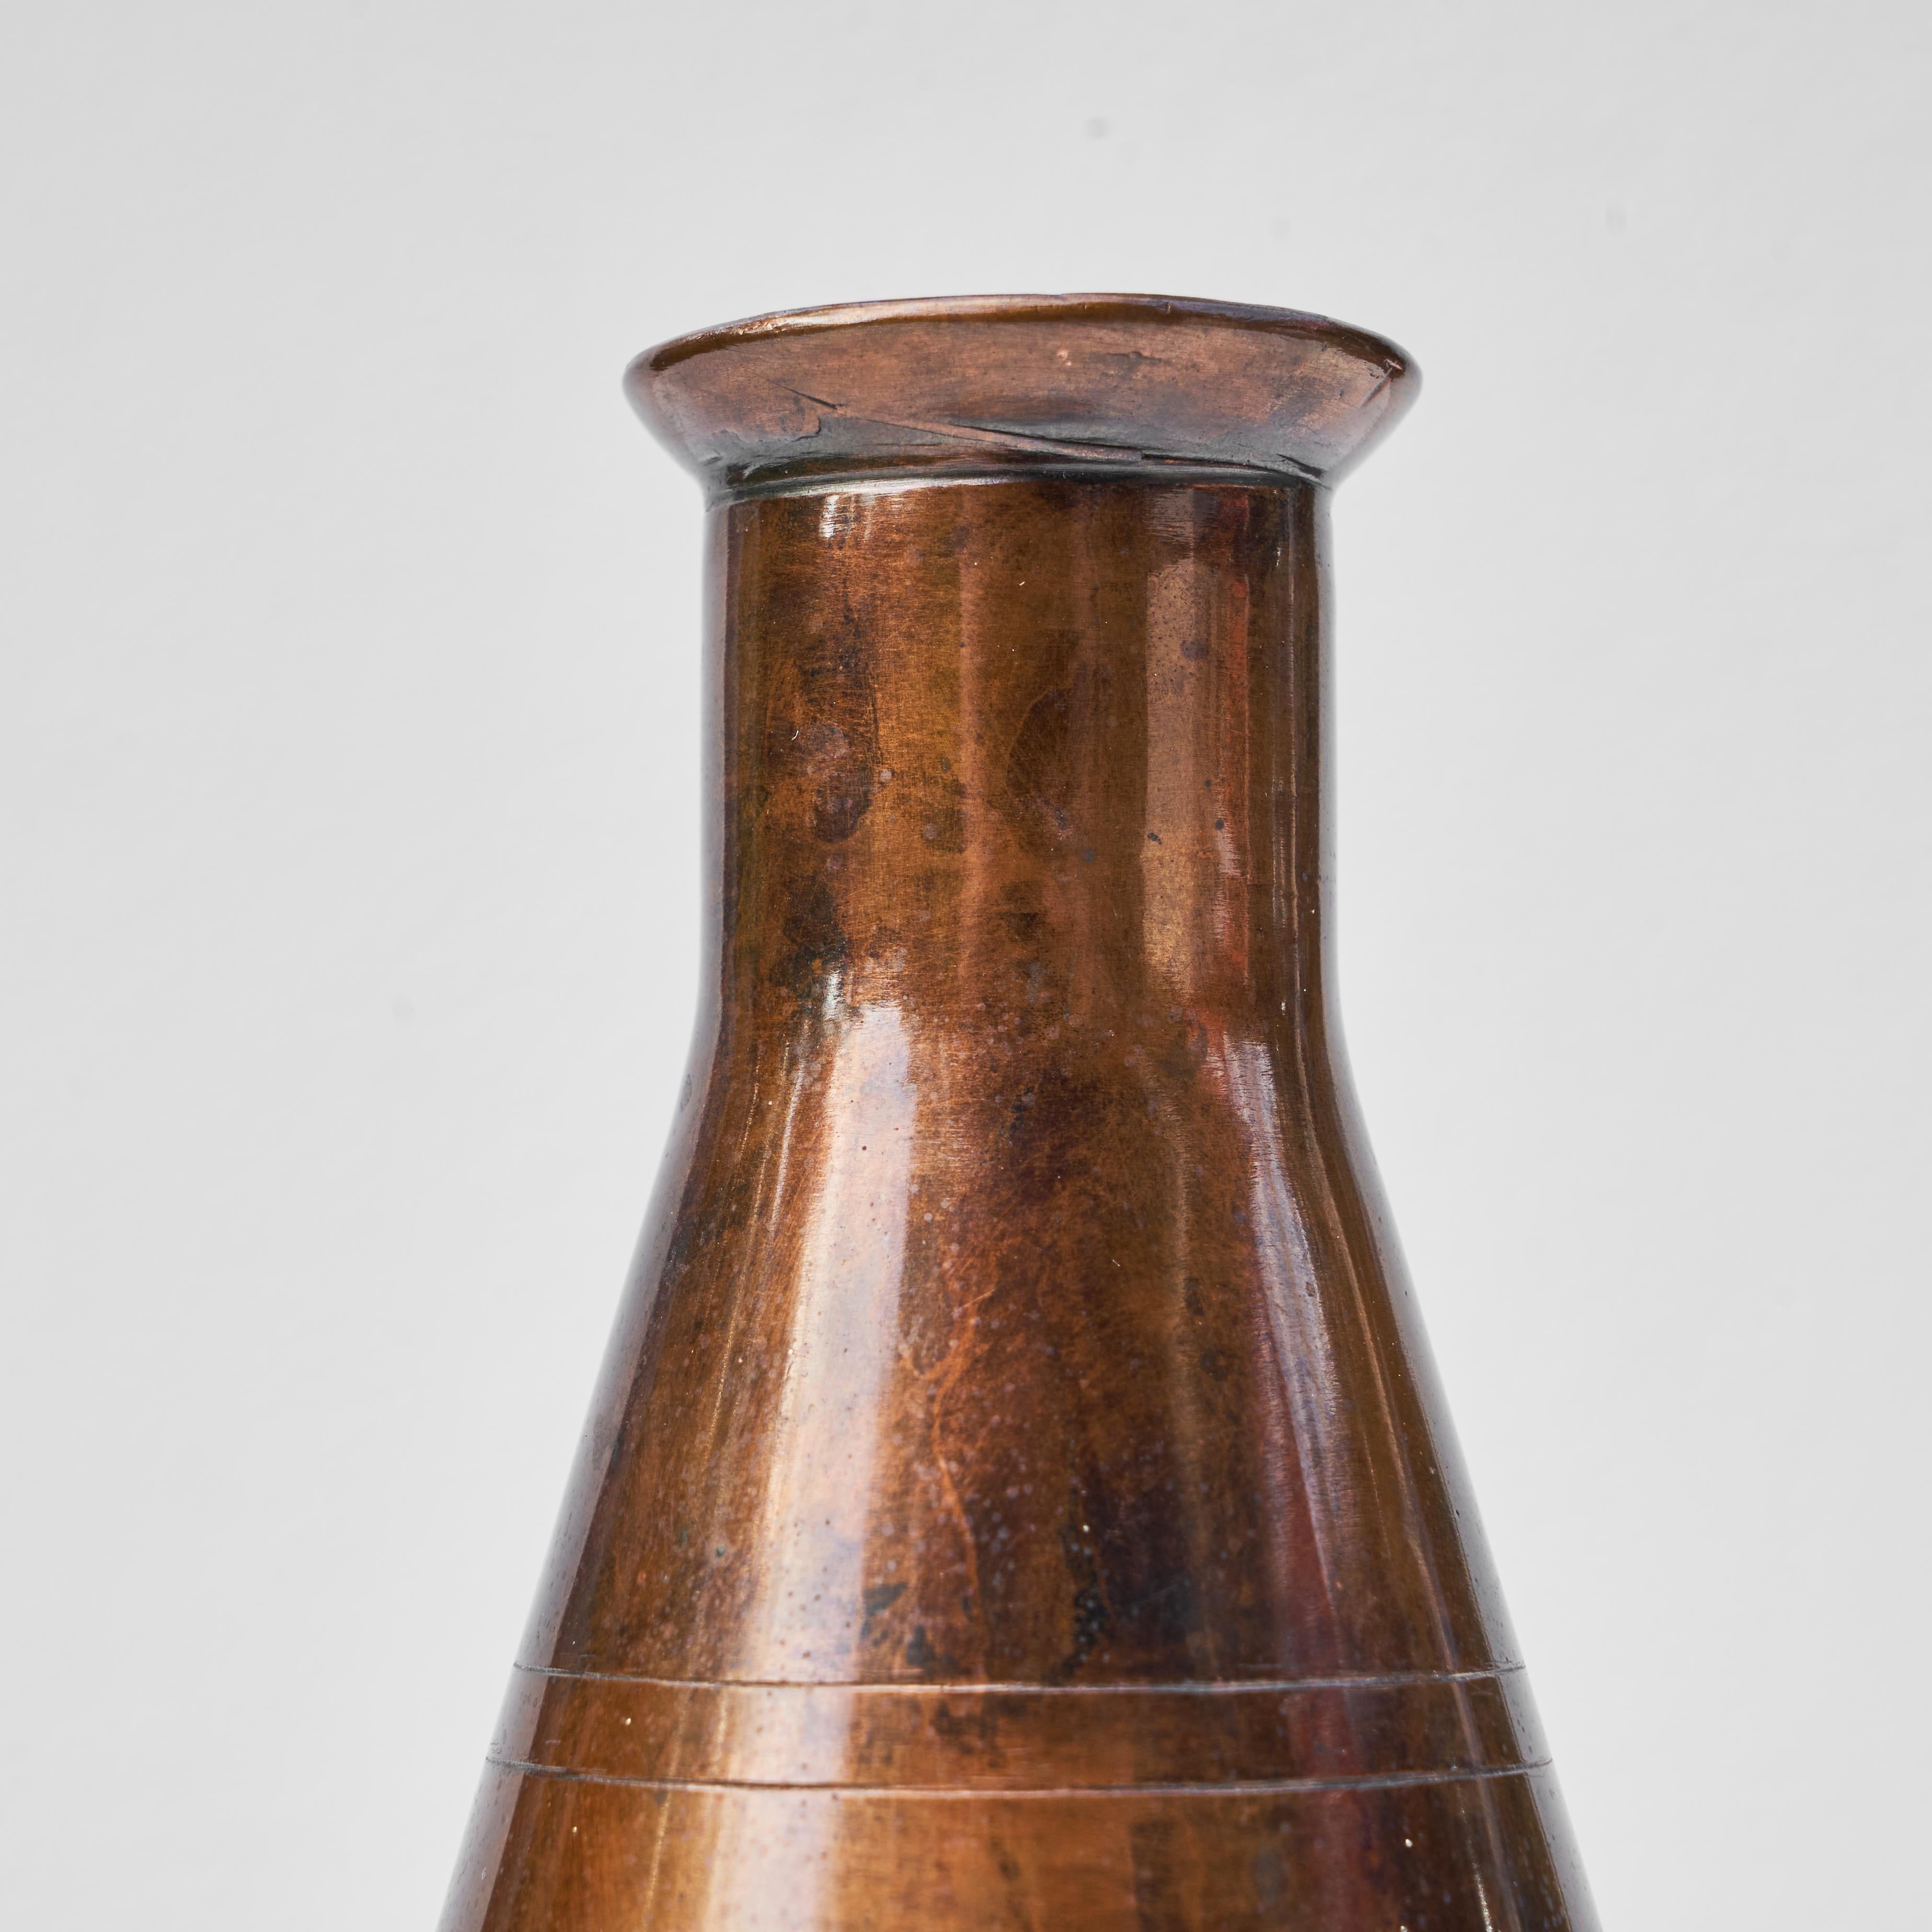 European Conical Vase in Patinated Copper, 1950 For Sale